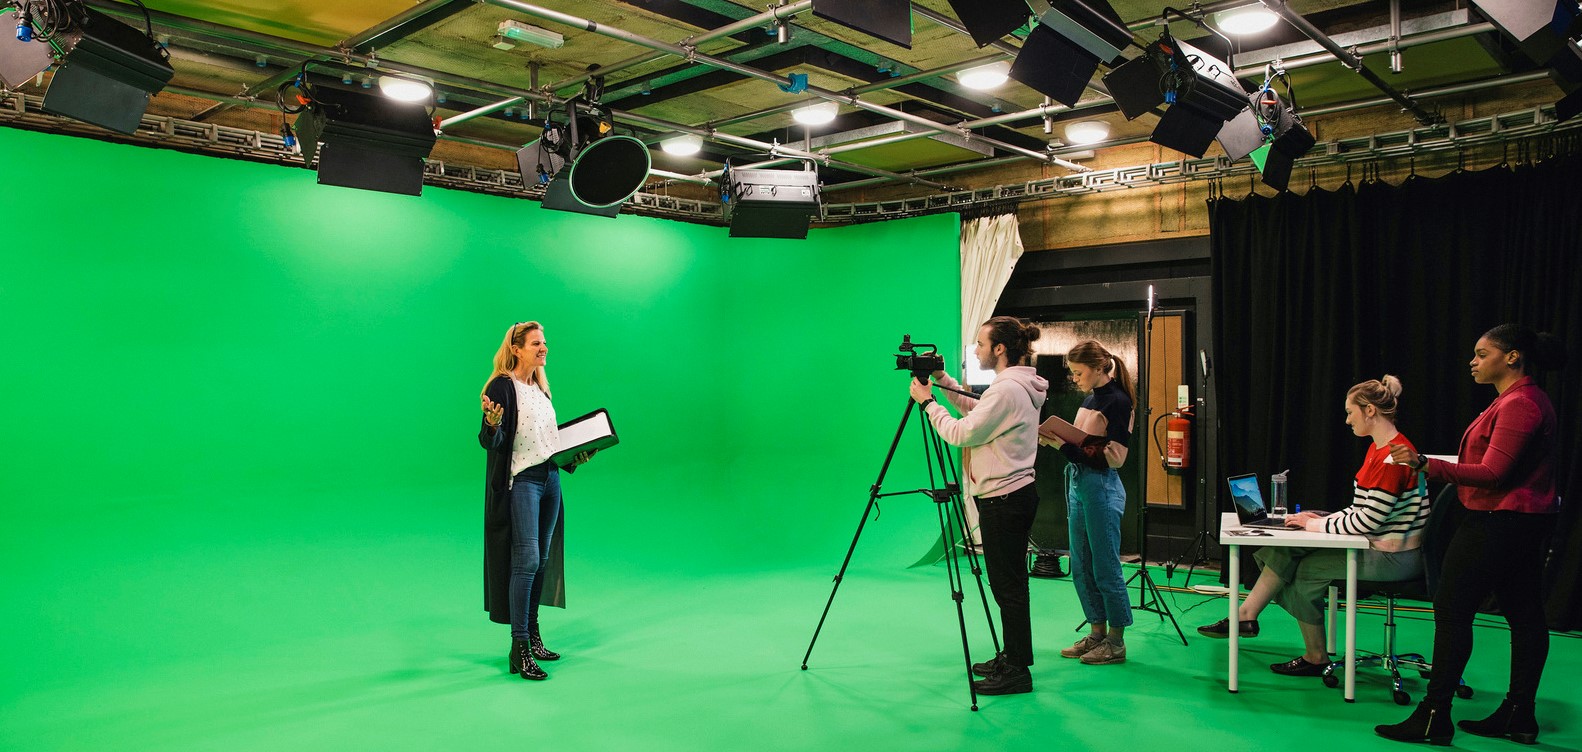 Five young student film makers rehearsing against green screen